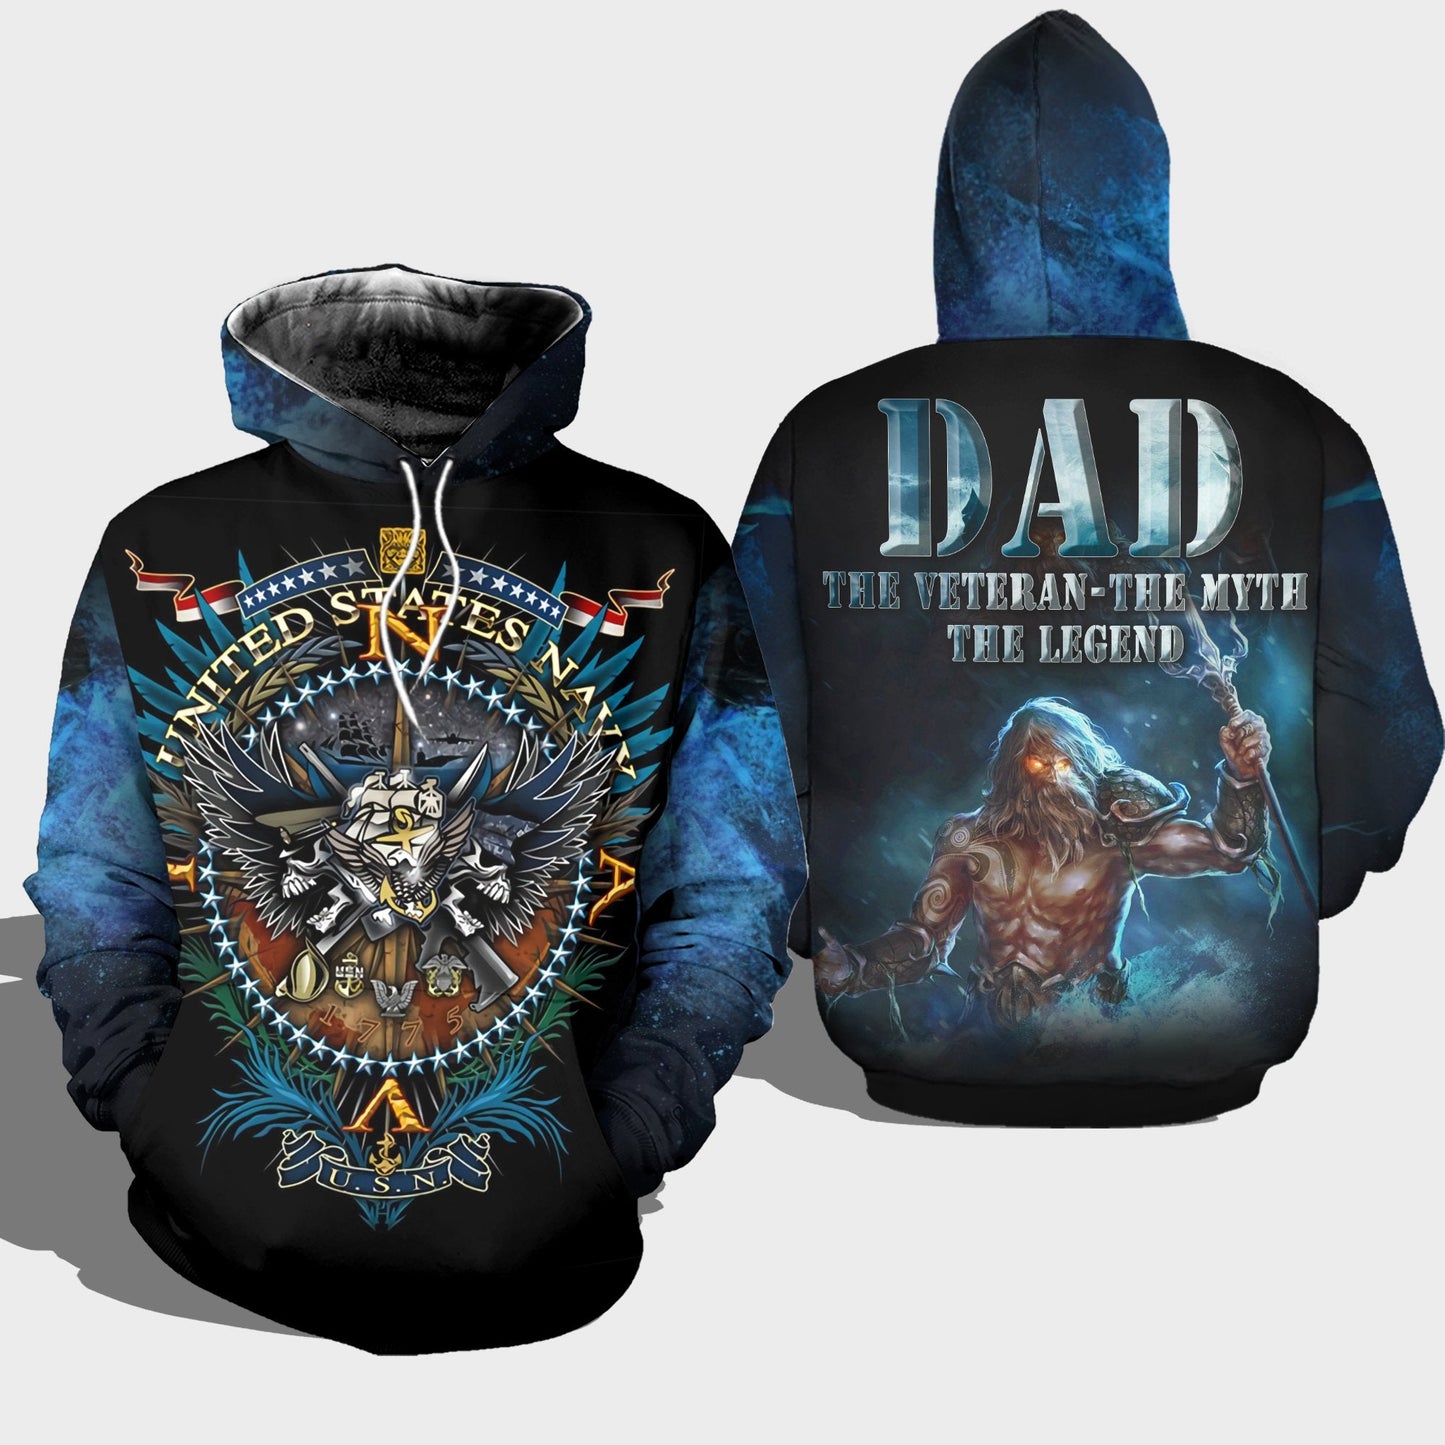 Unifinz Veteran Navy Father Hoodie Dad The Veteran Myth Legend T-shirt Veteran Hoodie Apparel Navy Hoodie Gift For Father's Day 2022